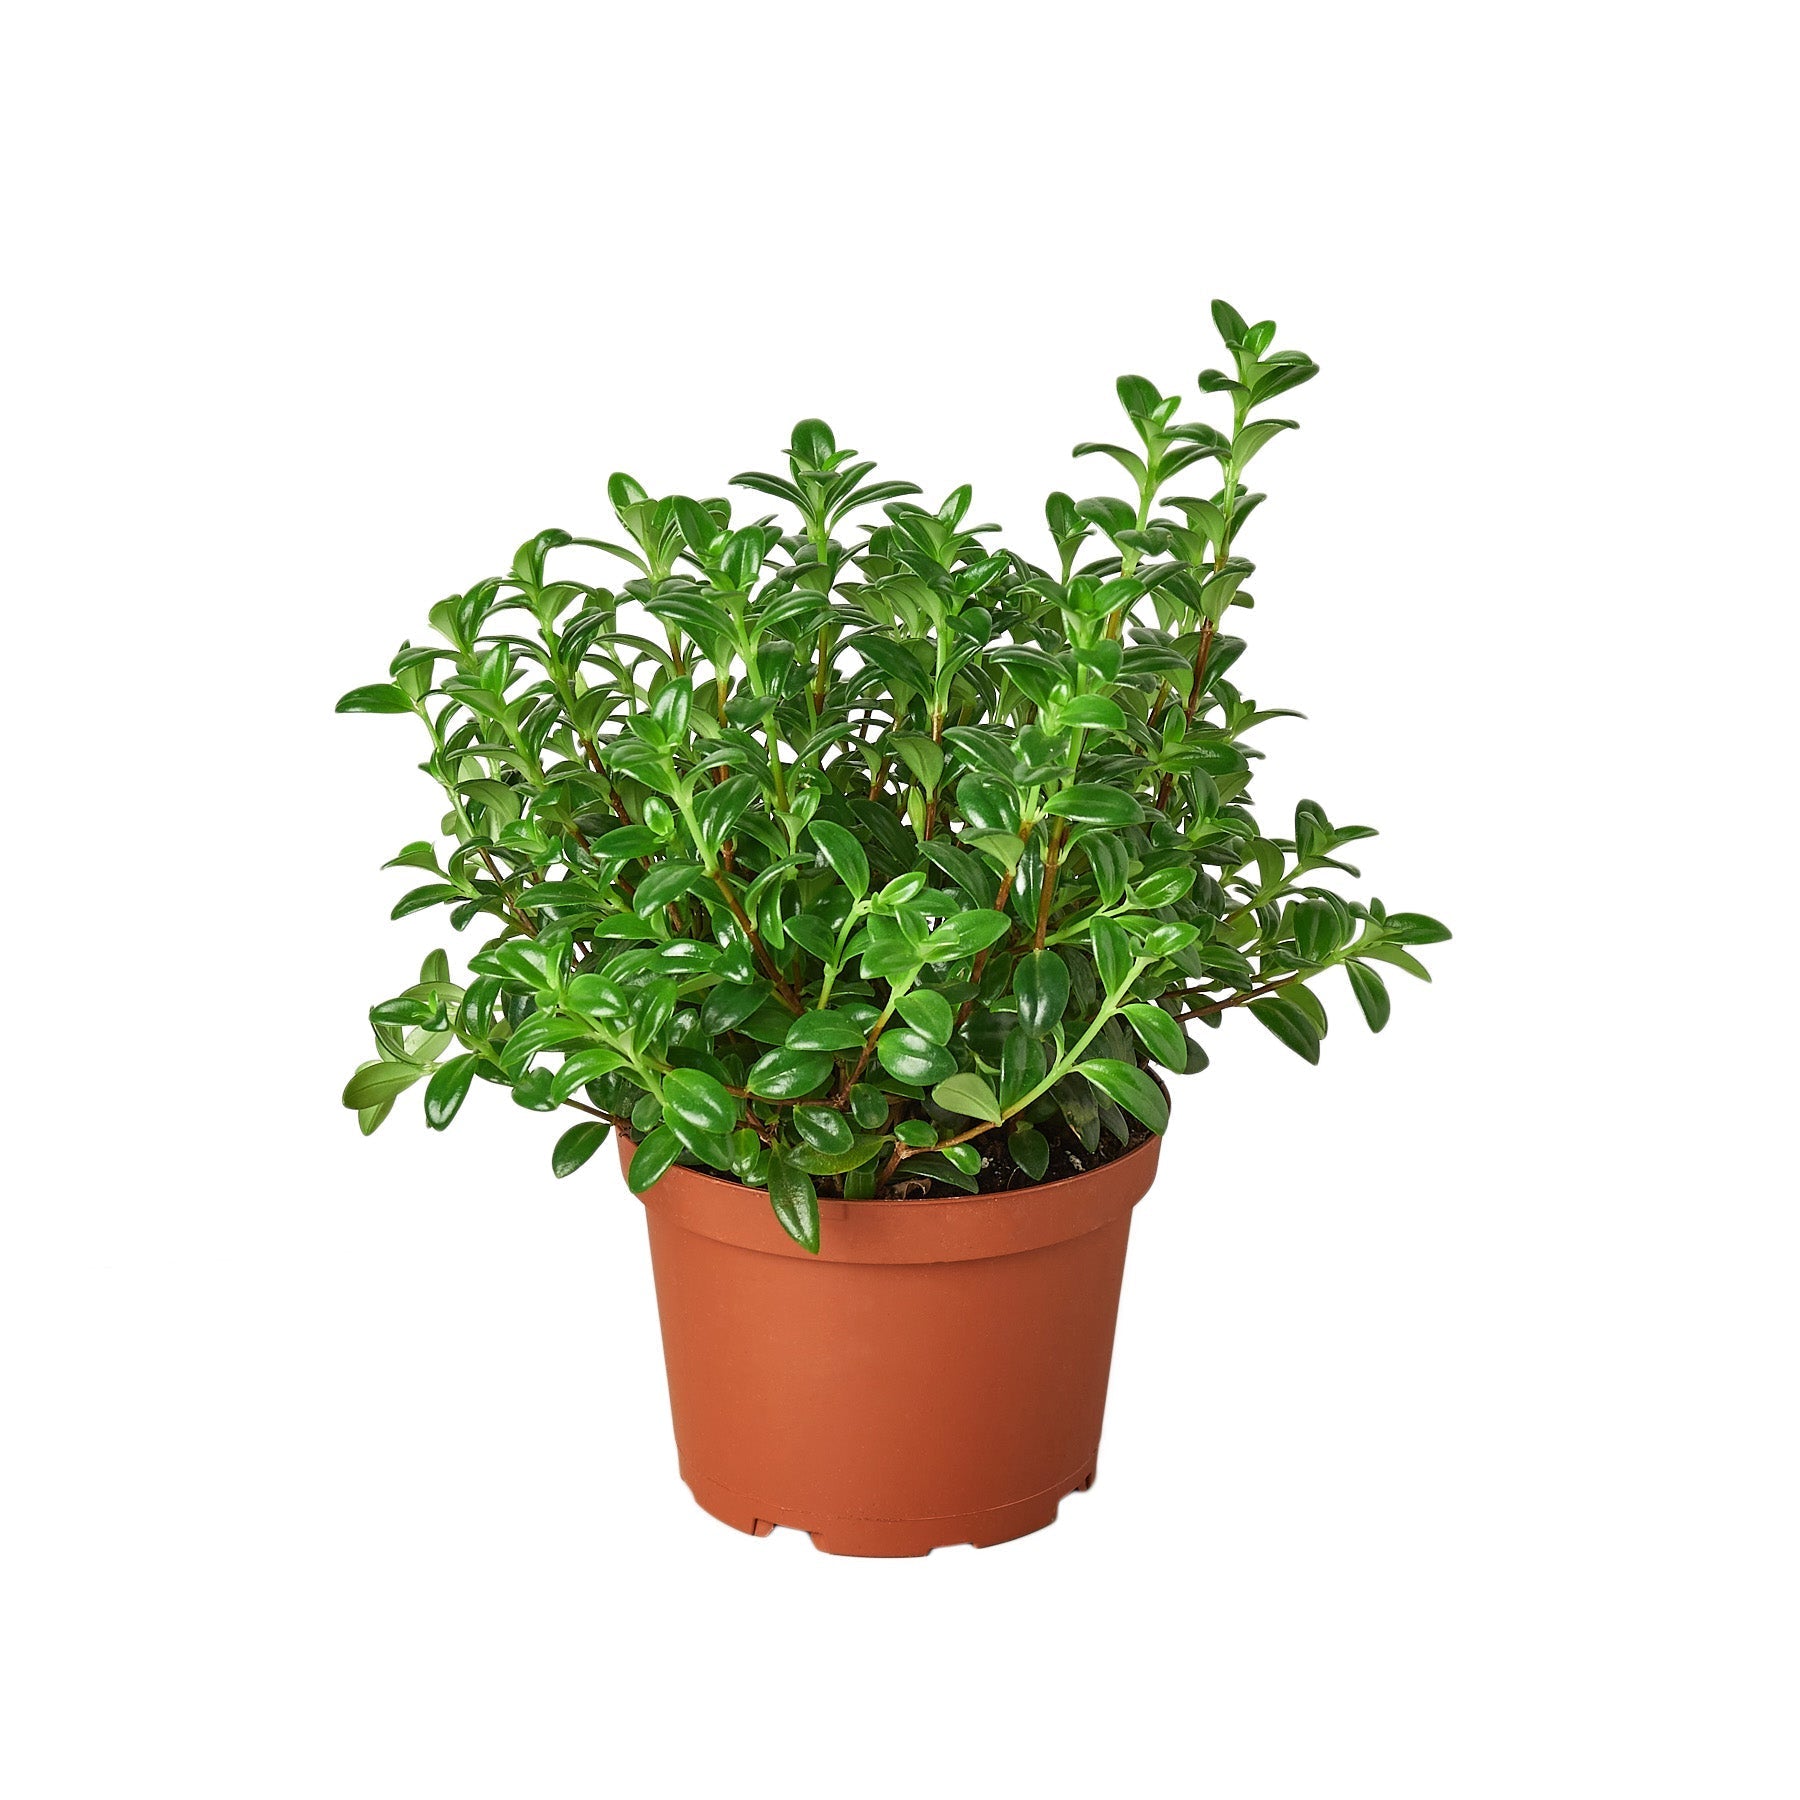 A small potted plant on a white background available at a nearby nursery.